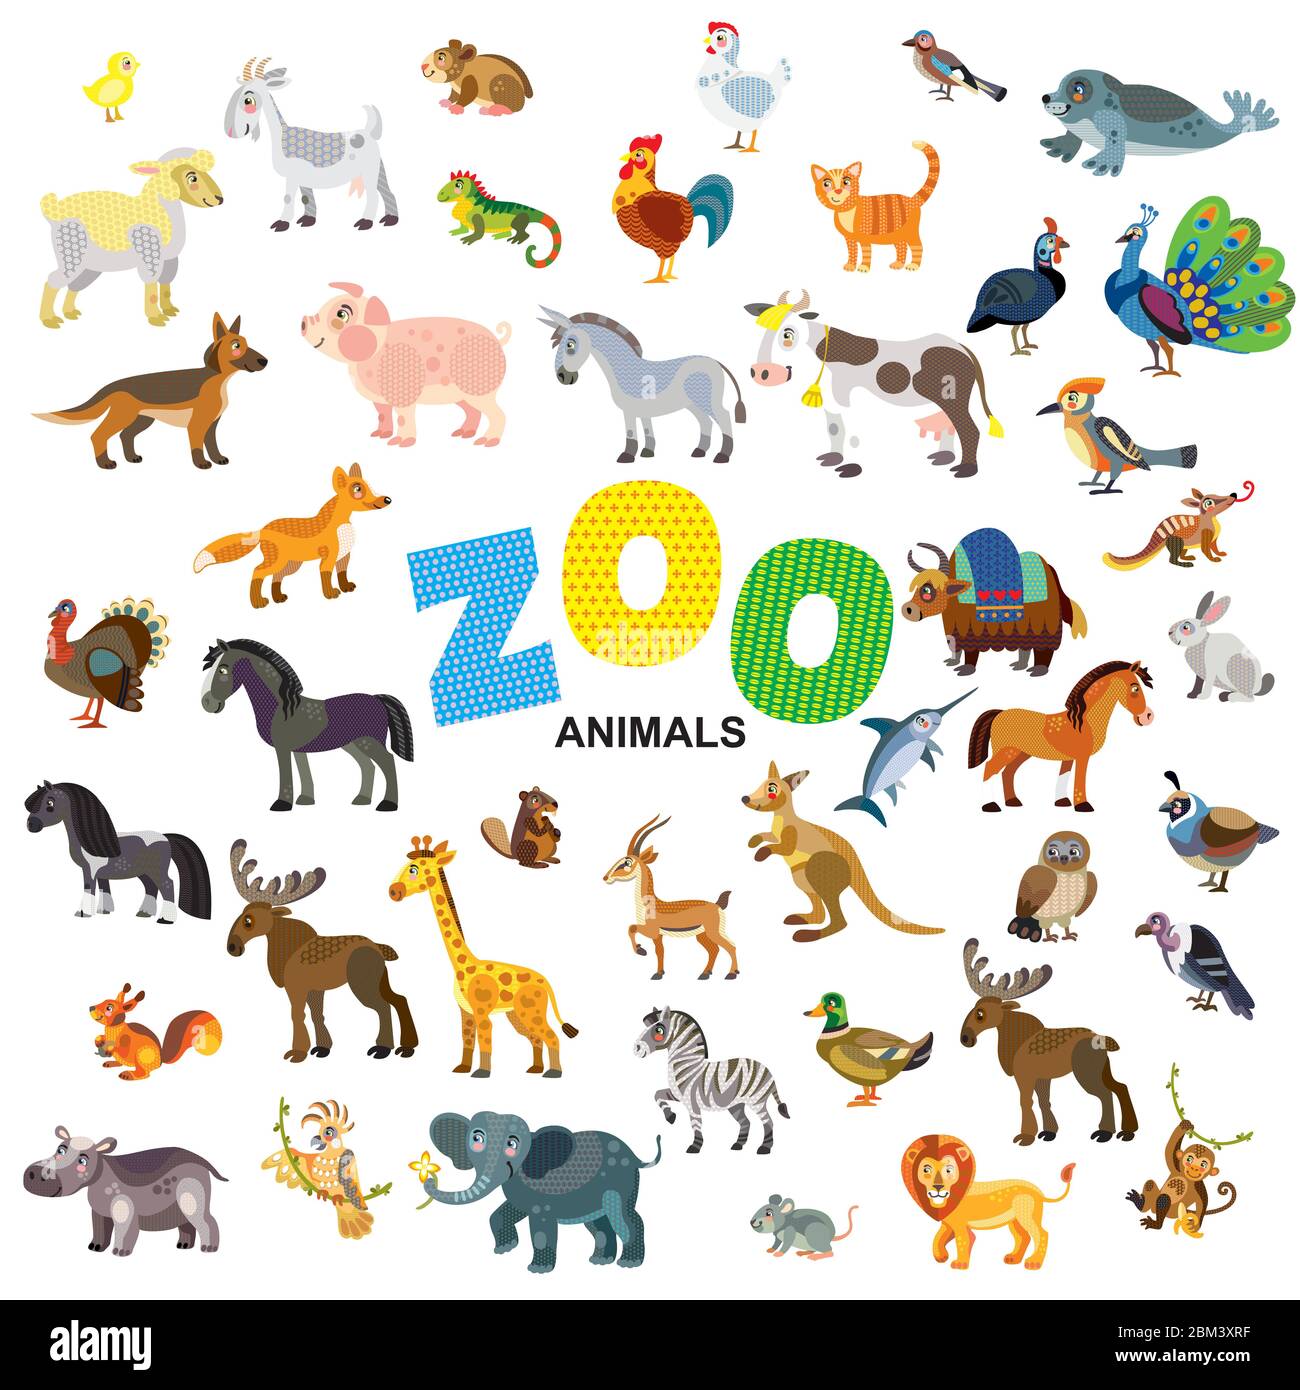 Zoo animals in front view and side view large vector cartoon set in flat style isolated on white background. Vector illustration of animals for childr Stock Vector